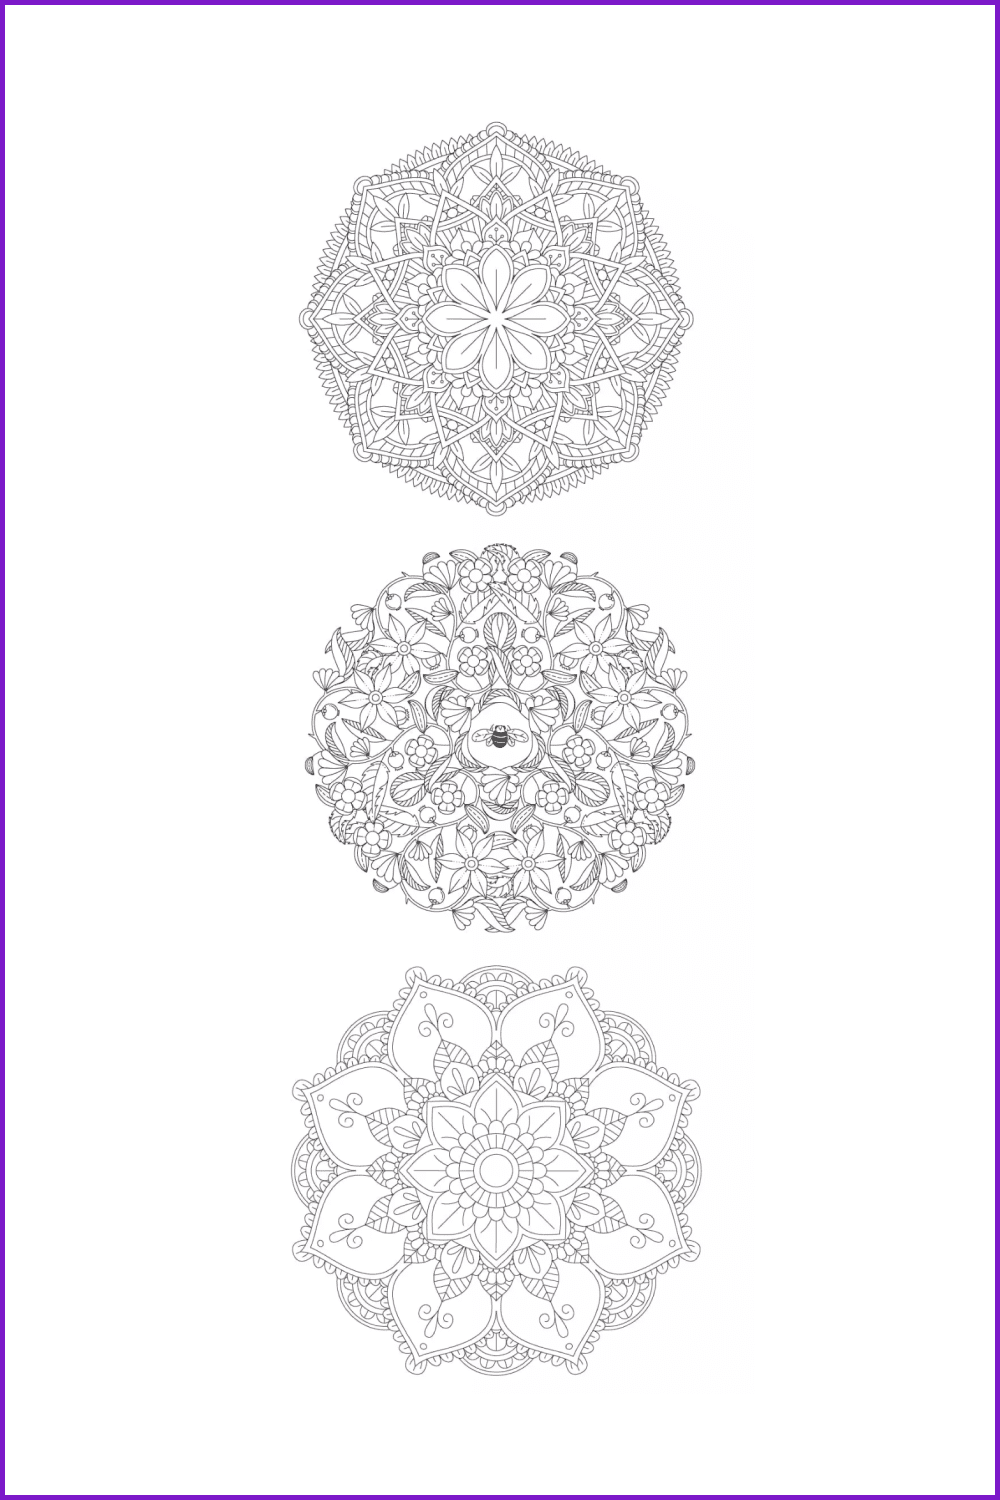 This is a mandala coloring for the attentive. There are many details here that require attention..